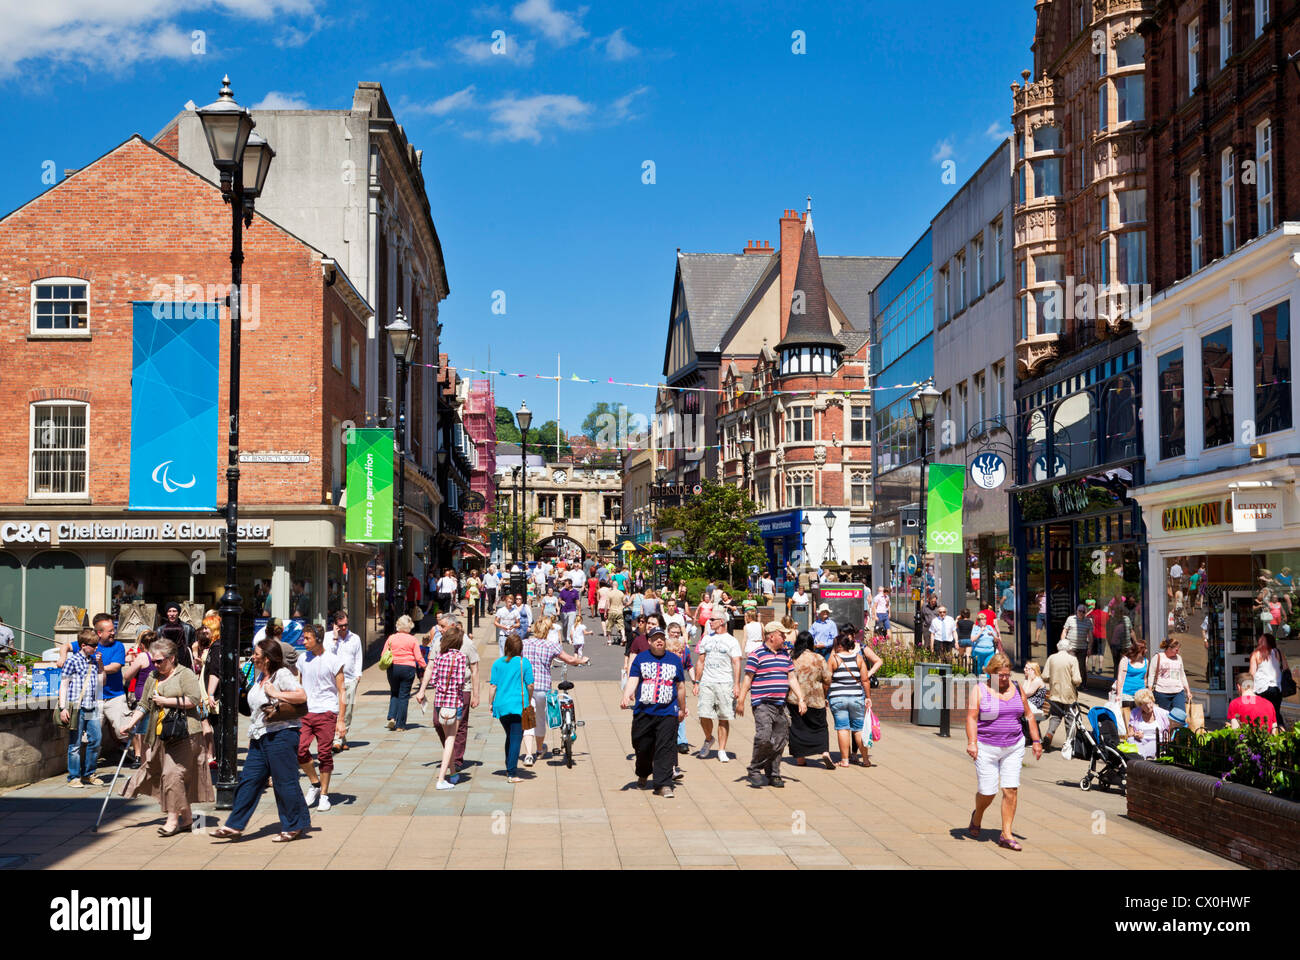 Lincoln city centre shopping street Lincoln Lincolnshire UK GB EU Europe Stock Photo